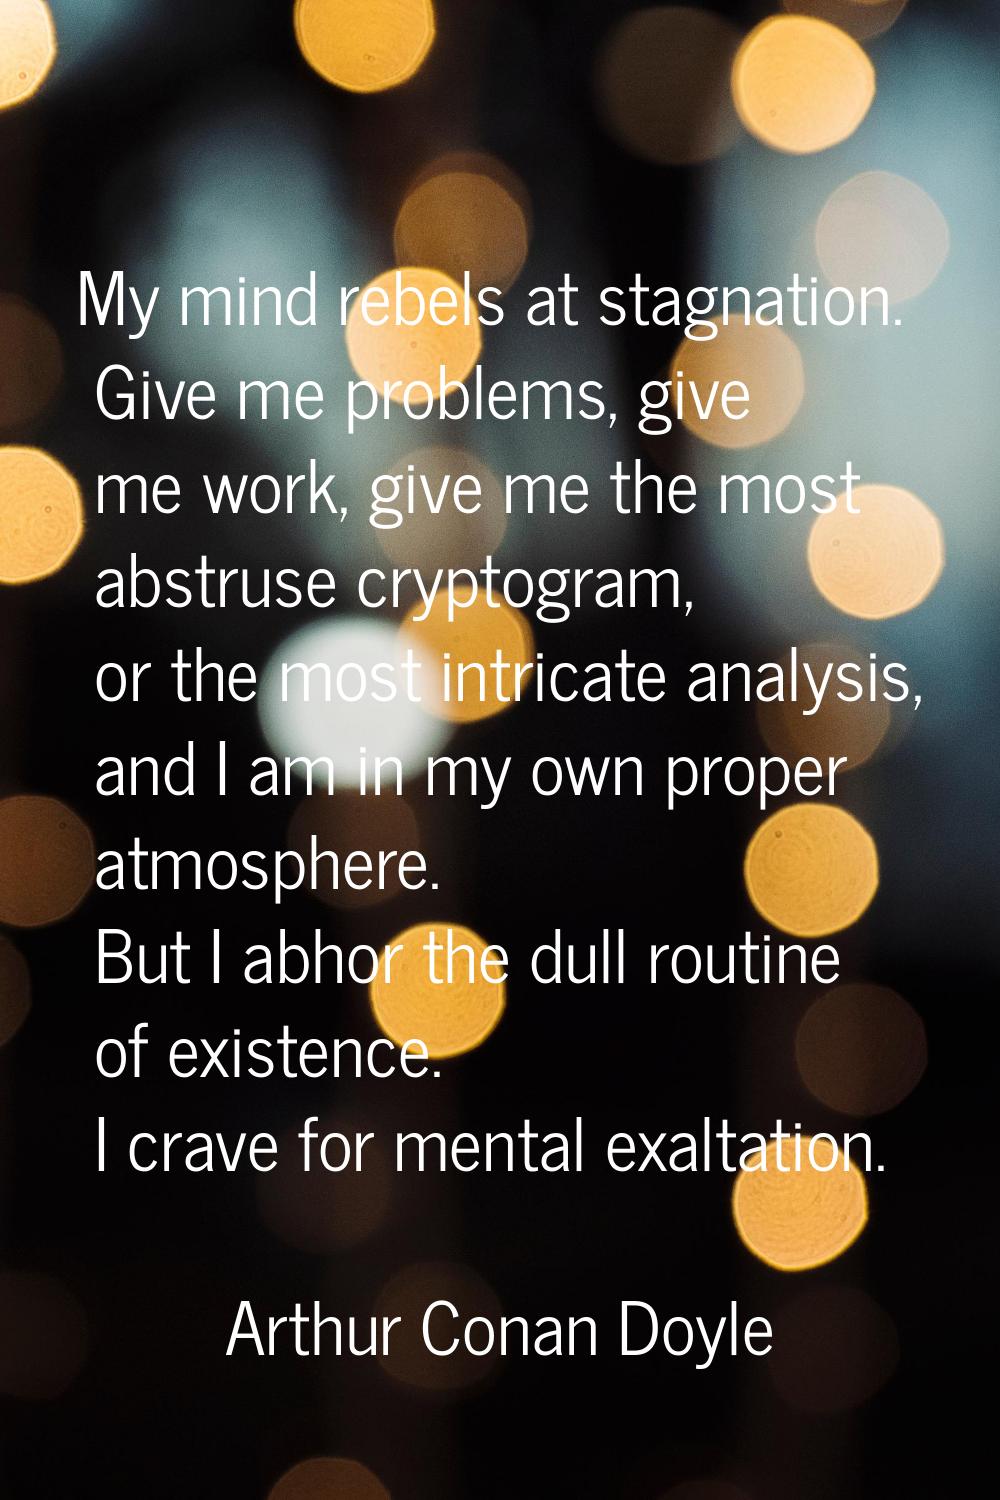 My mind rebels at stagnation. Give me problems, give me work, give me the most abstruse cryptogram,